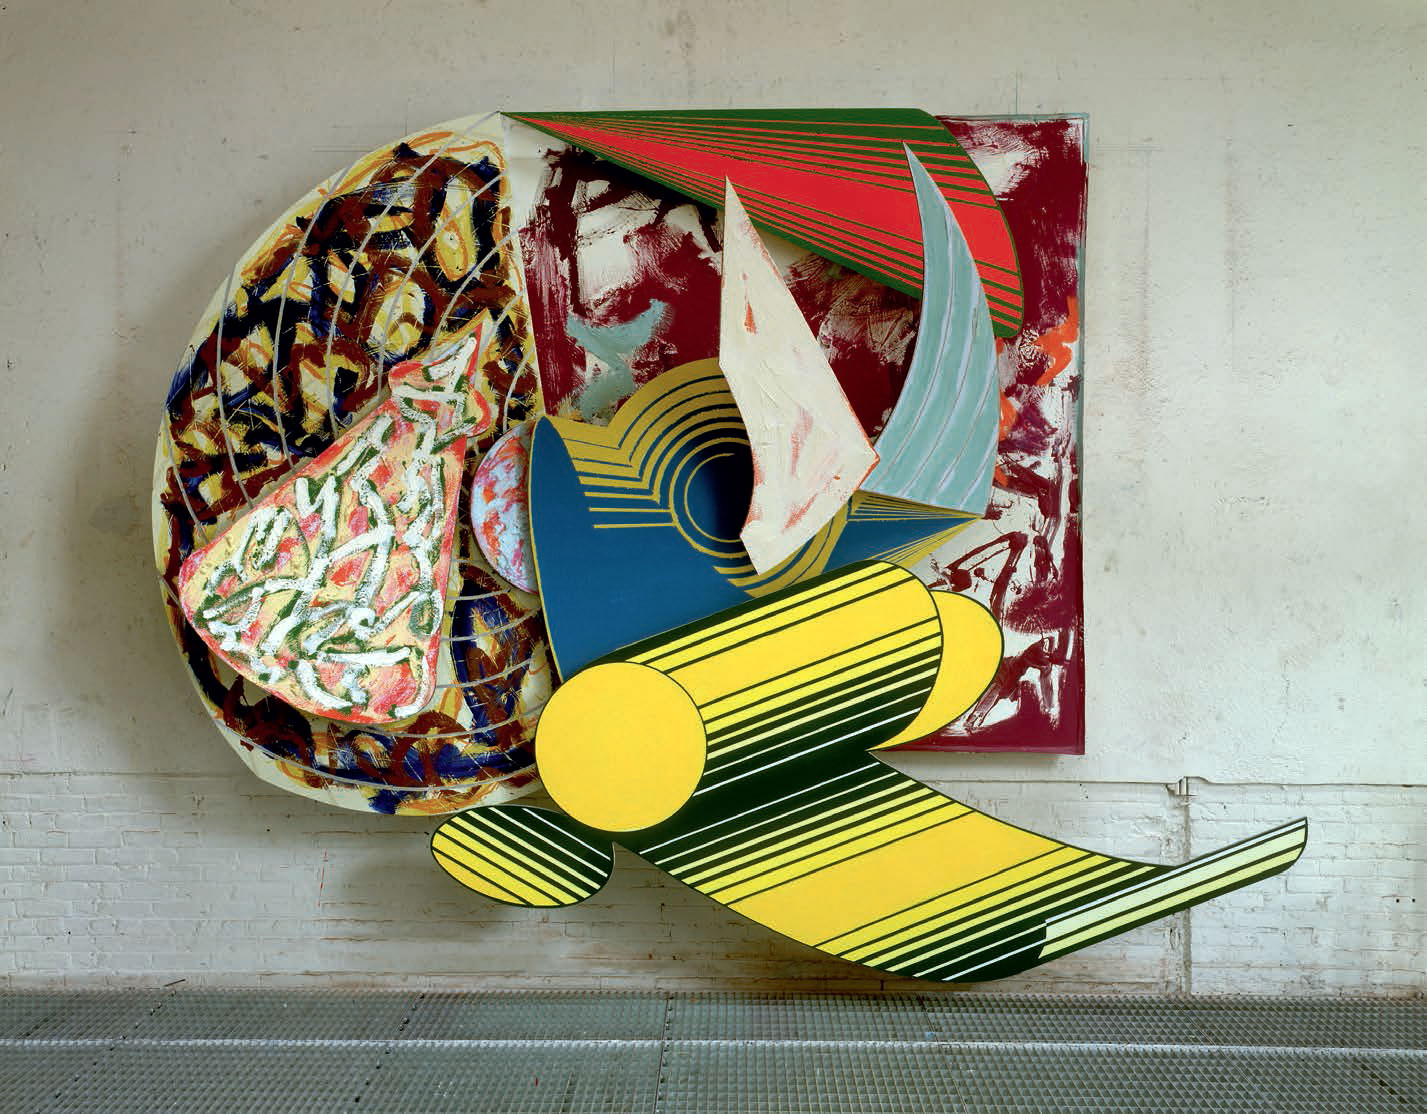 Giufà e La Statua Di Gesso (1984) by Frank Stella, from his Cones and Pillars series, as reproduced in our new book